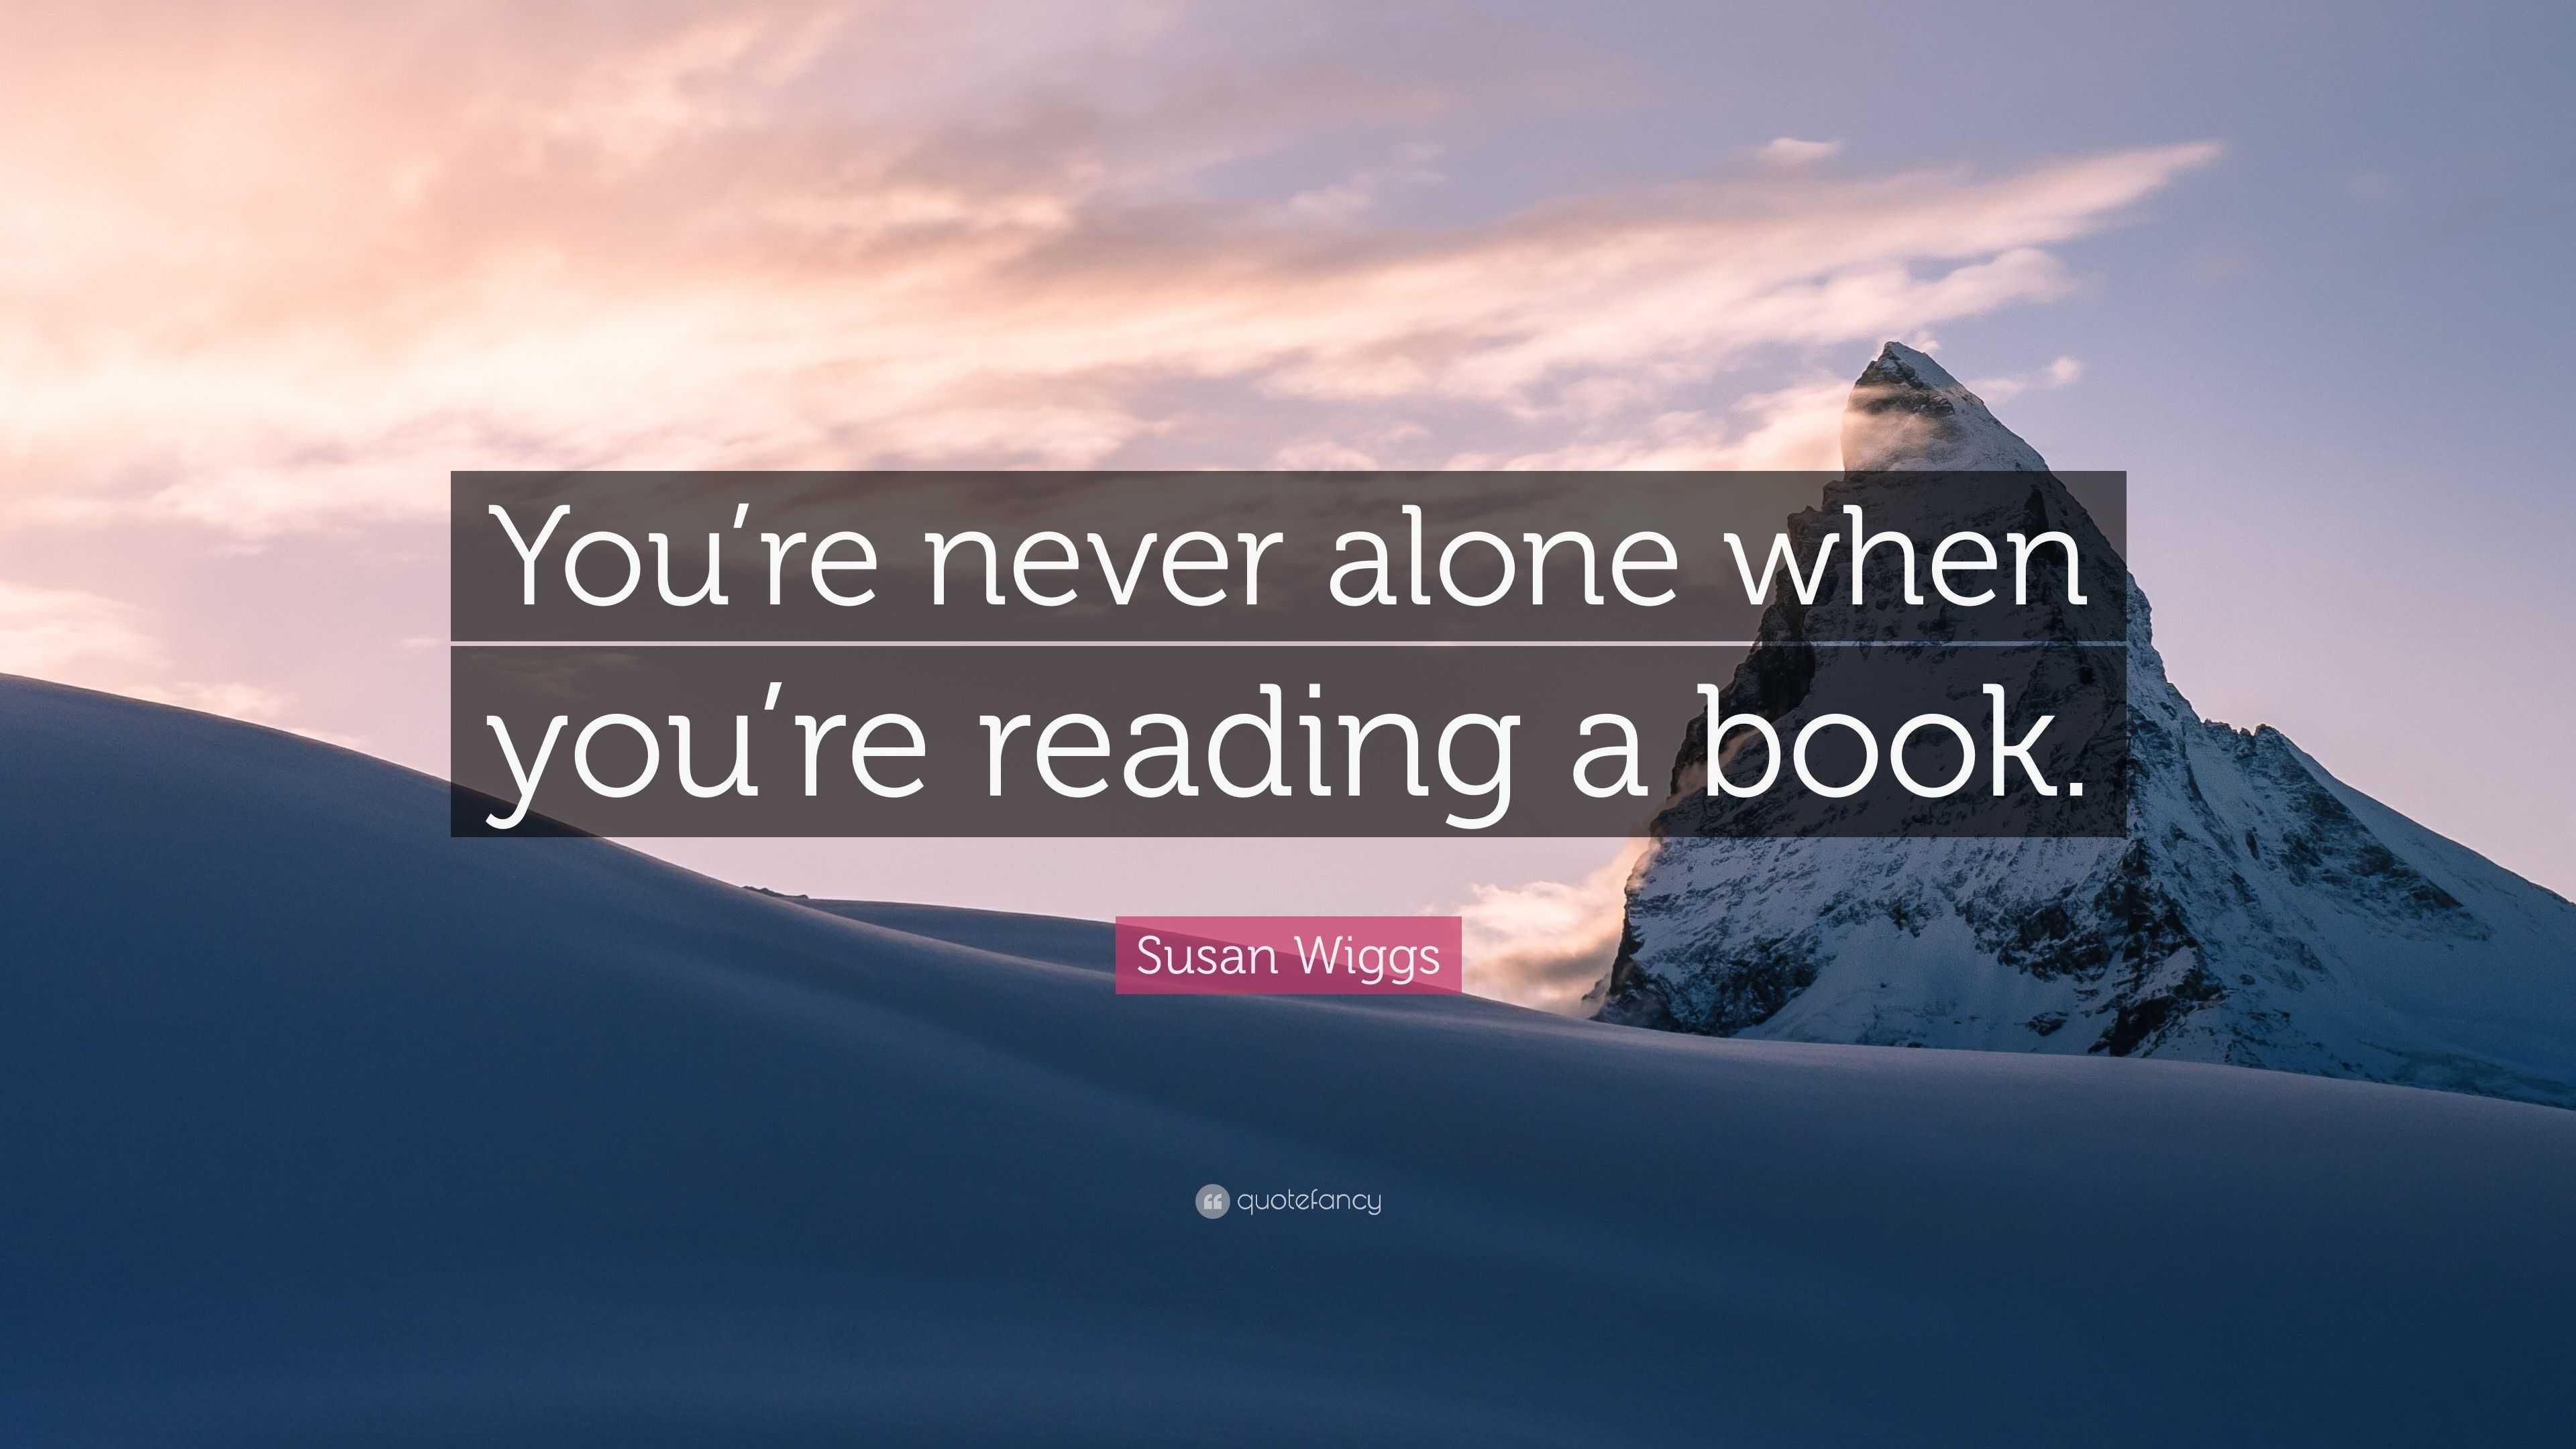 Susan Wiggs Quote: “You’re never alone when you’re reading a book.”